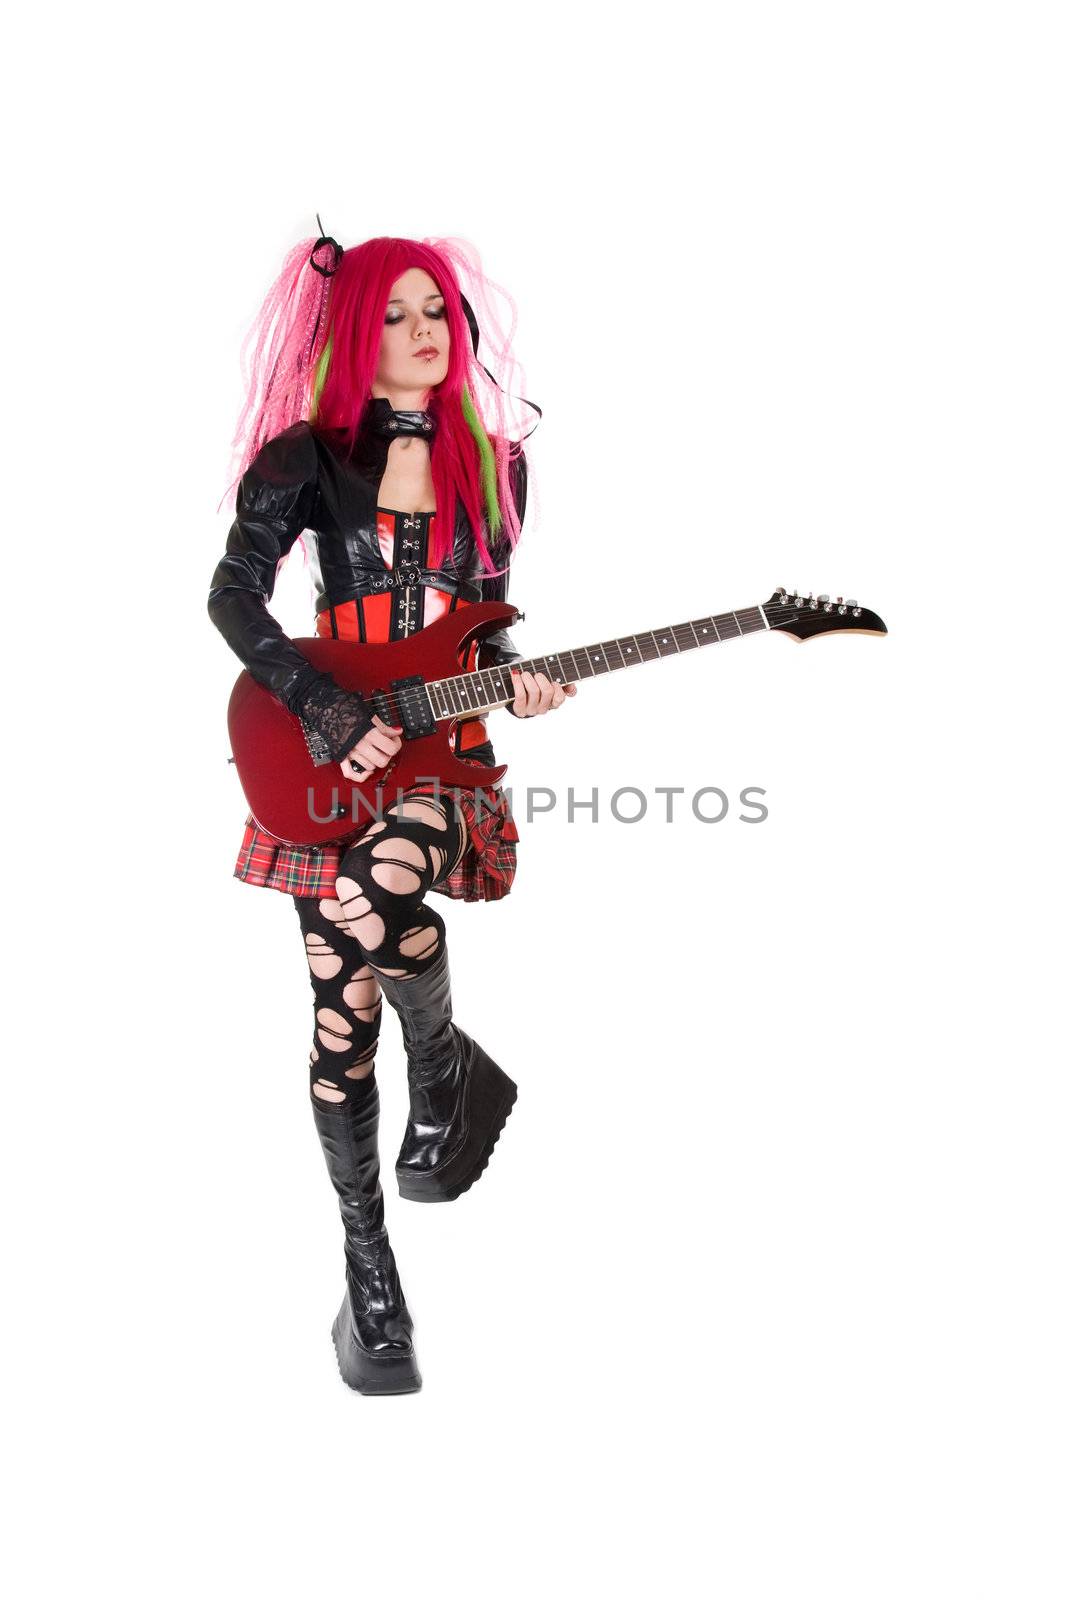 Gothic girl playing guitar  by Elisanth